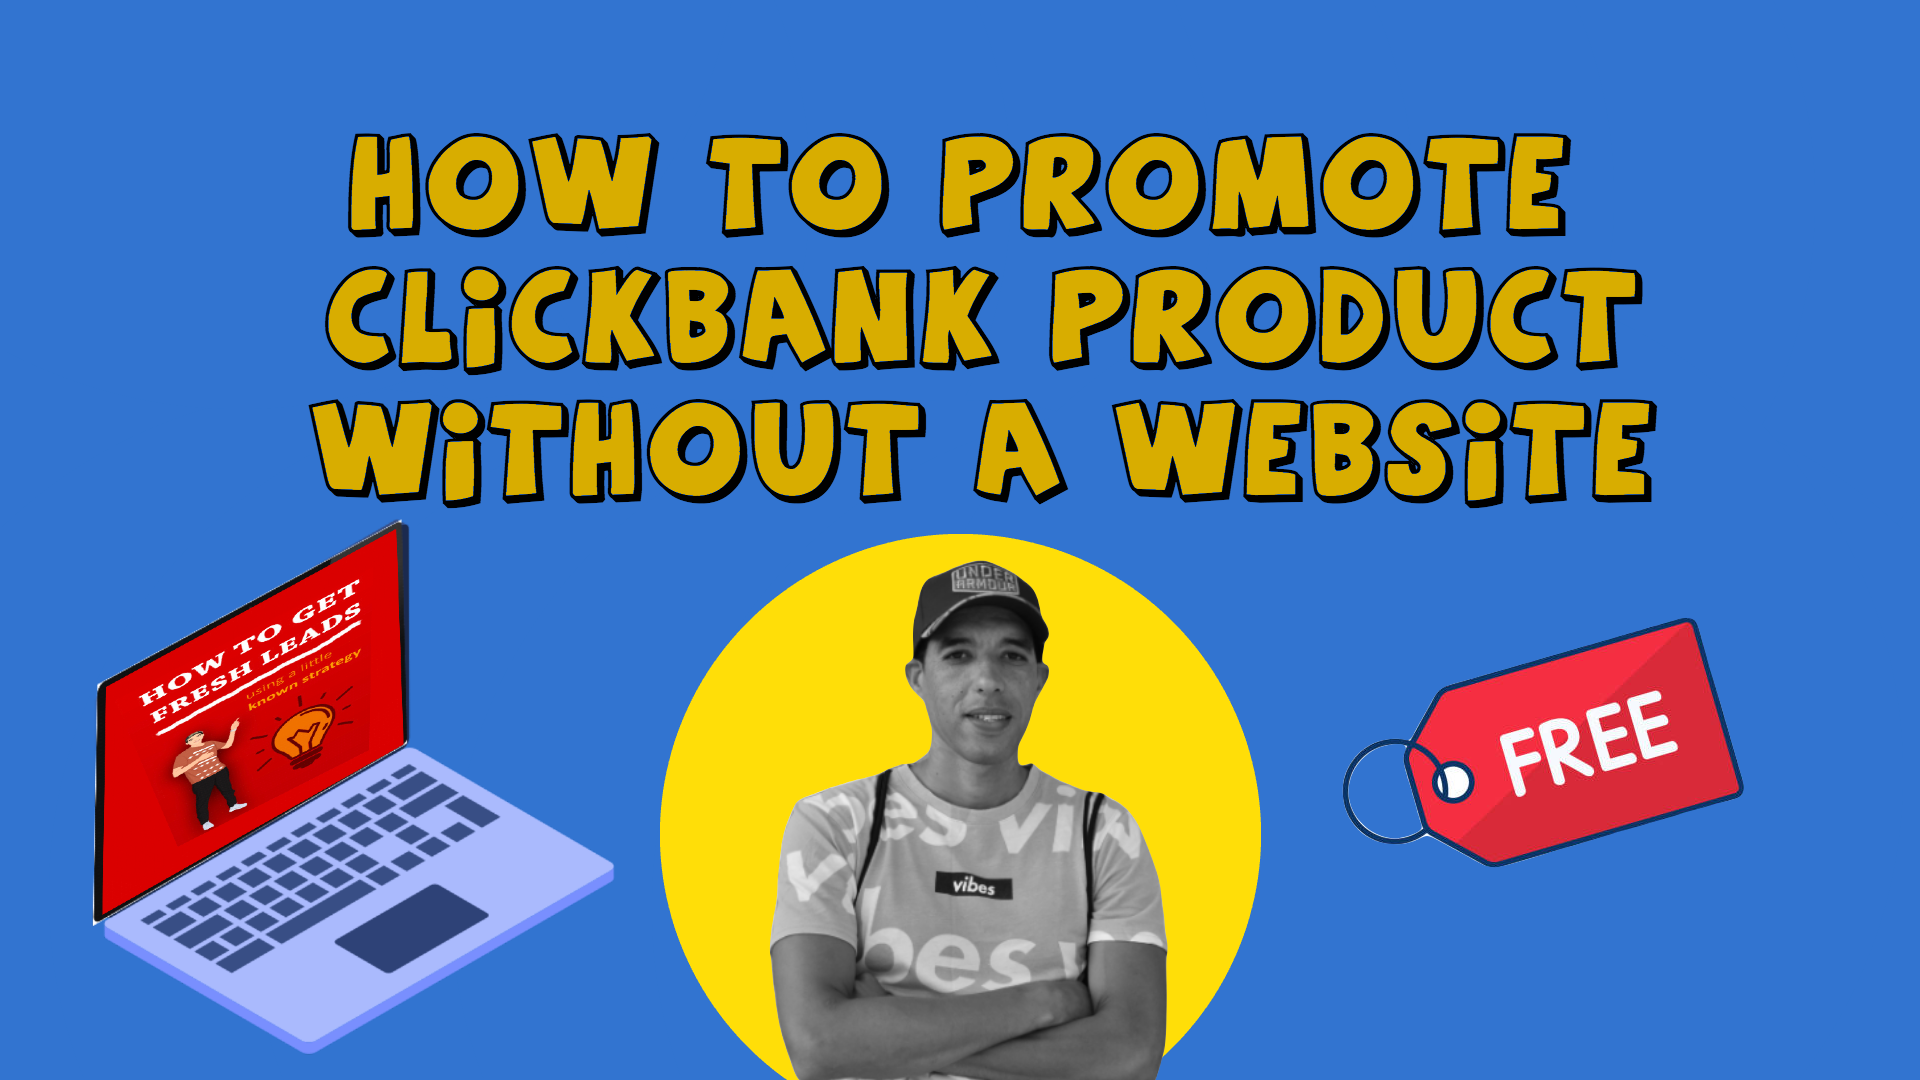 how to promote clickbank products without a website.